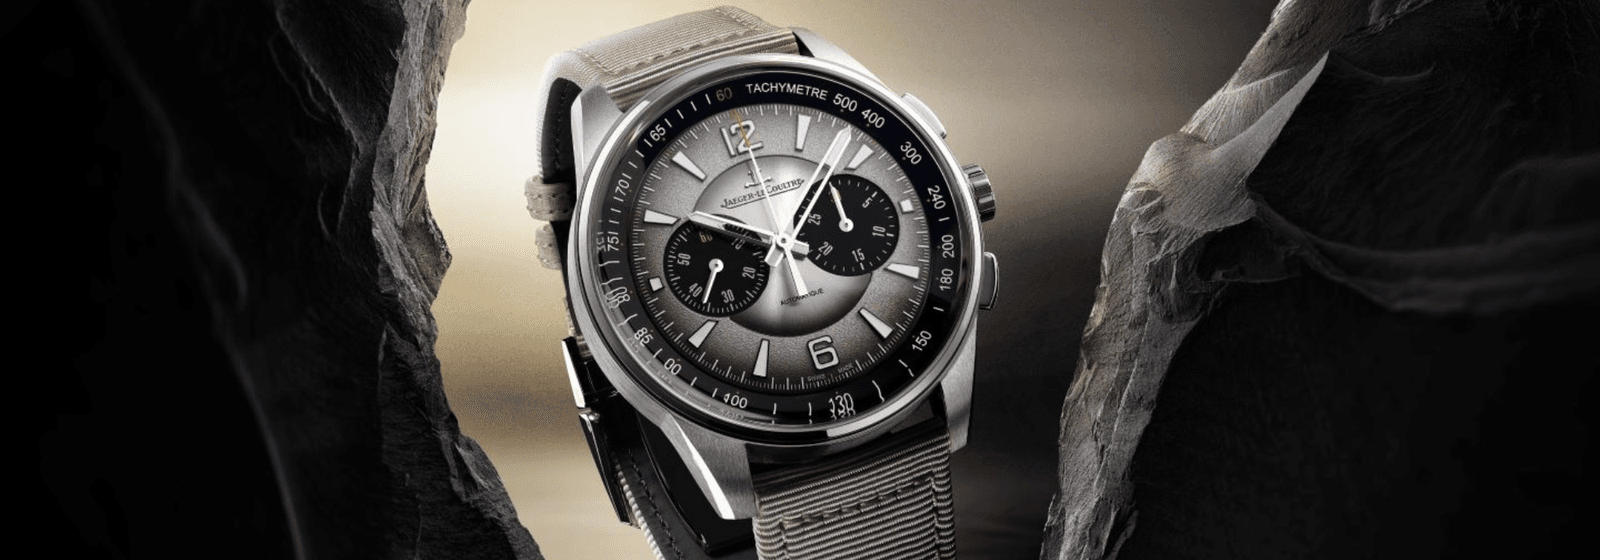 Jaeger-LeCoultre Elevates the Polaris Chronograph with Two New Lacquer Dials